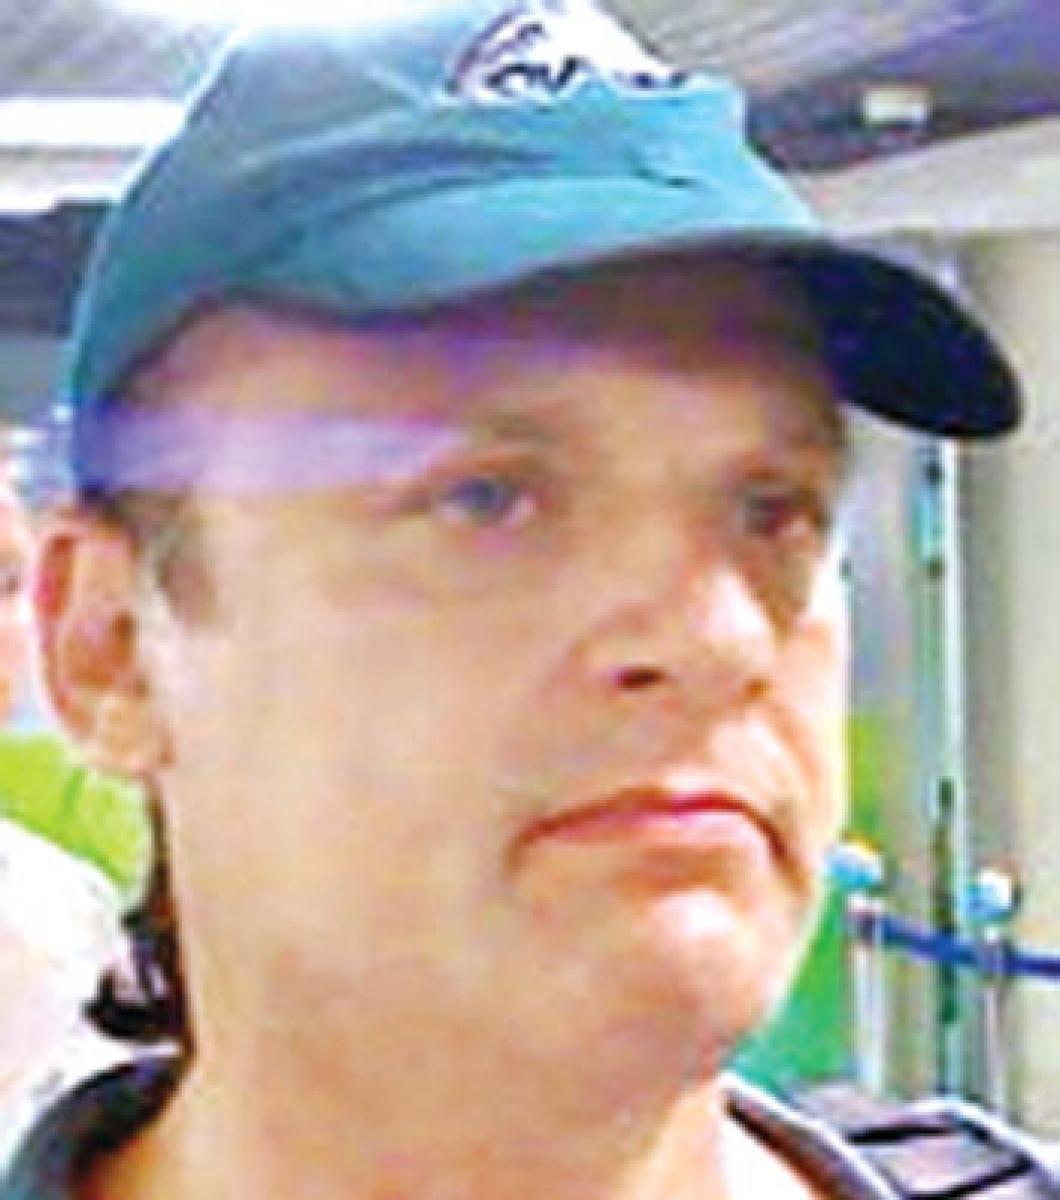 Headley pardoned, made approver in 26/11 case